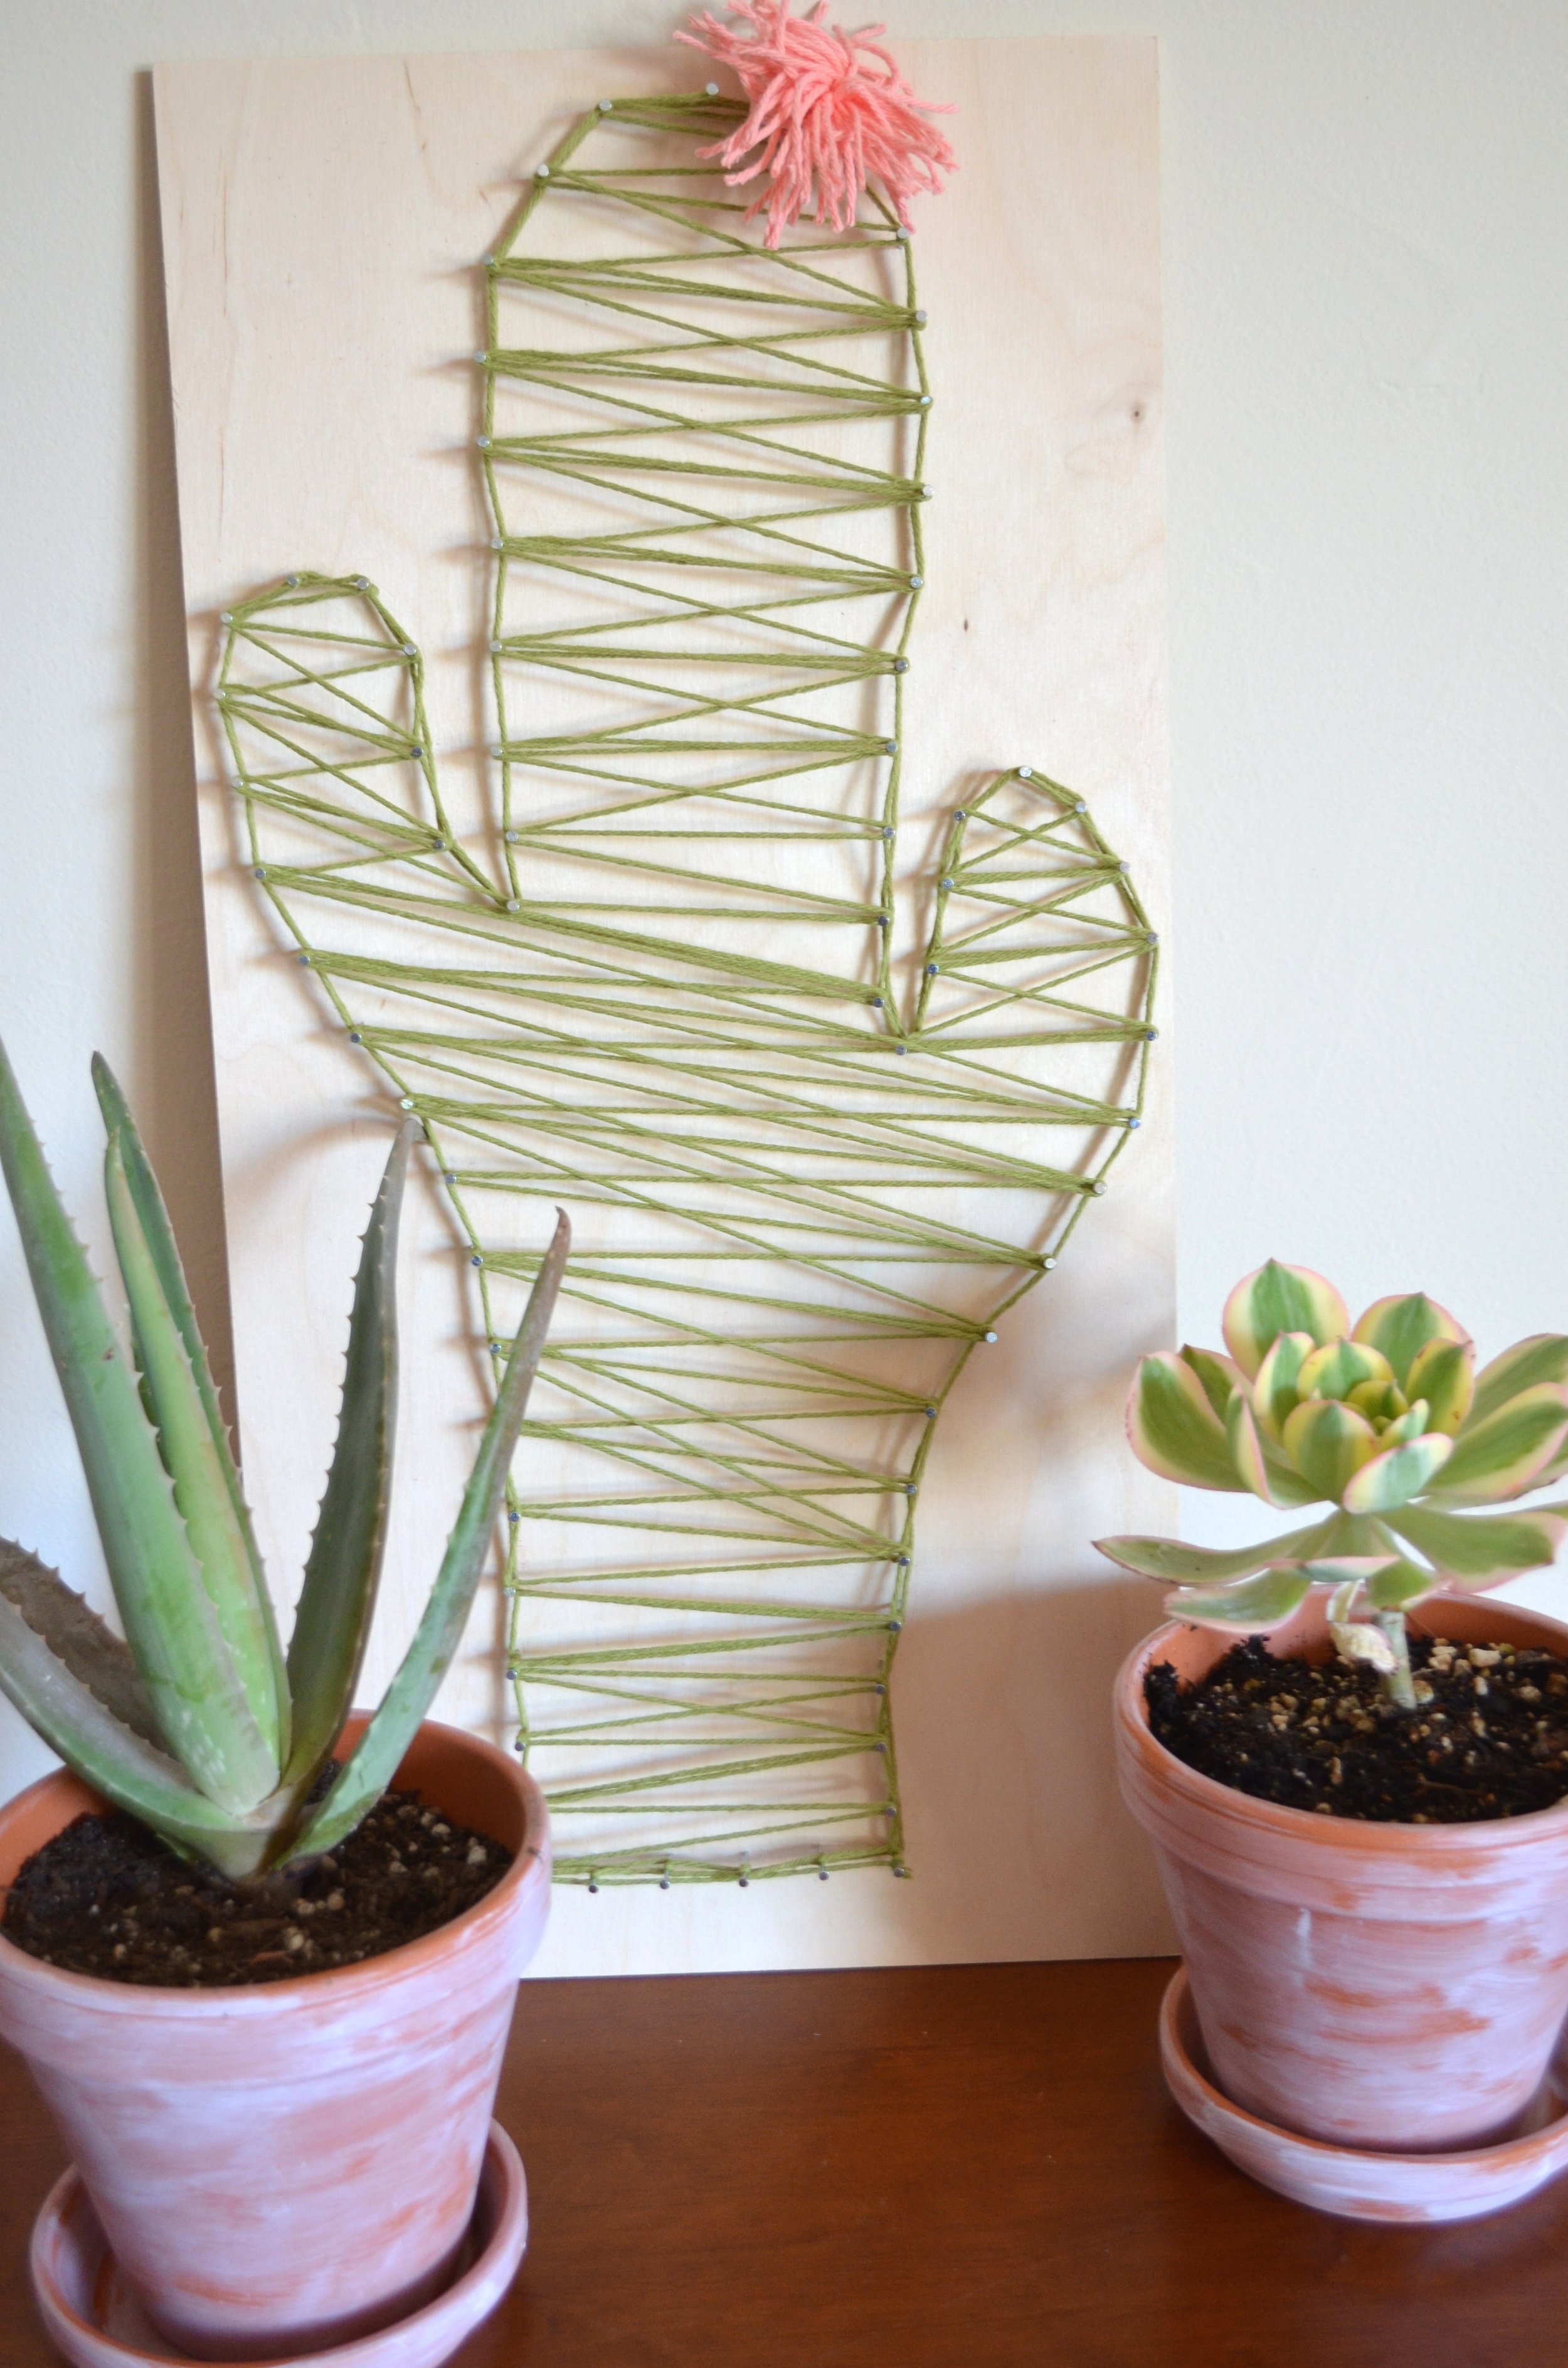 DIY Cactus String Art Craft - From Scratch with Maria Provenzano